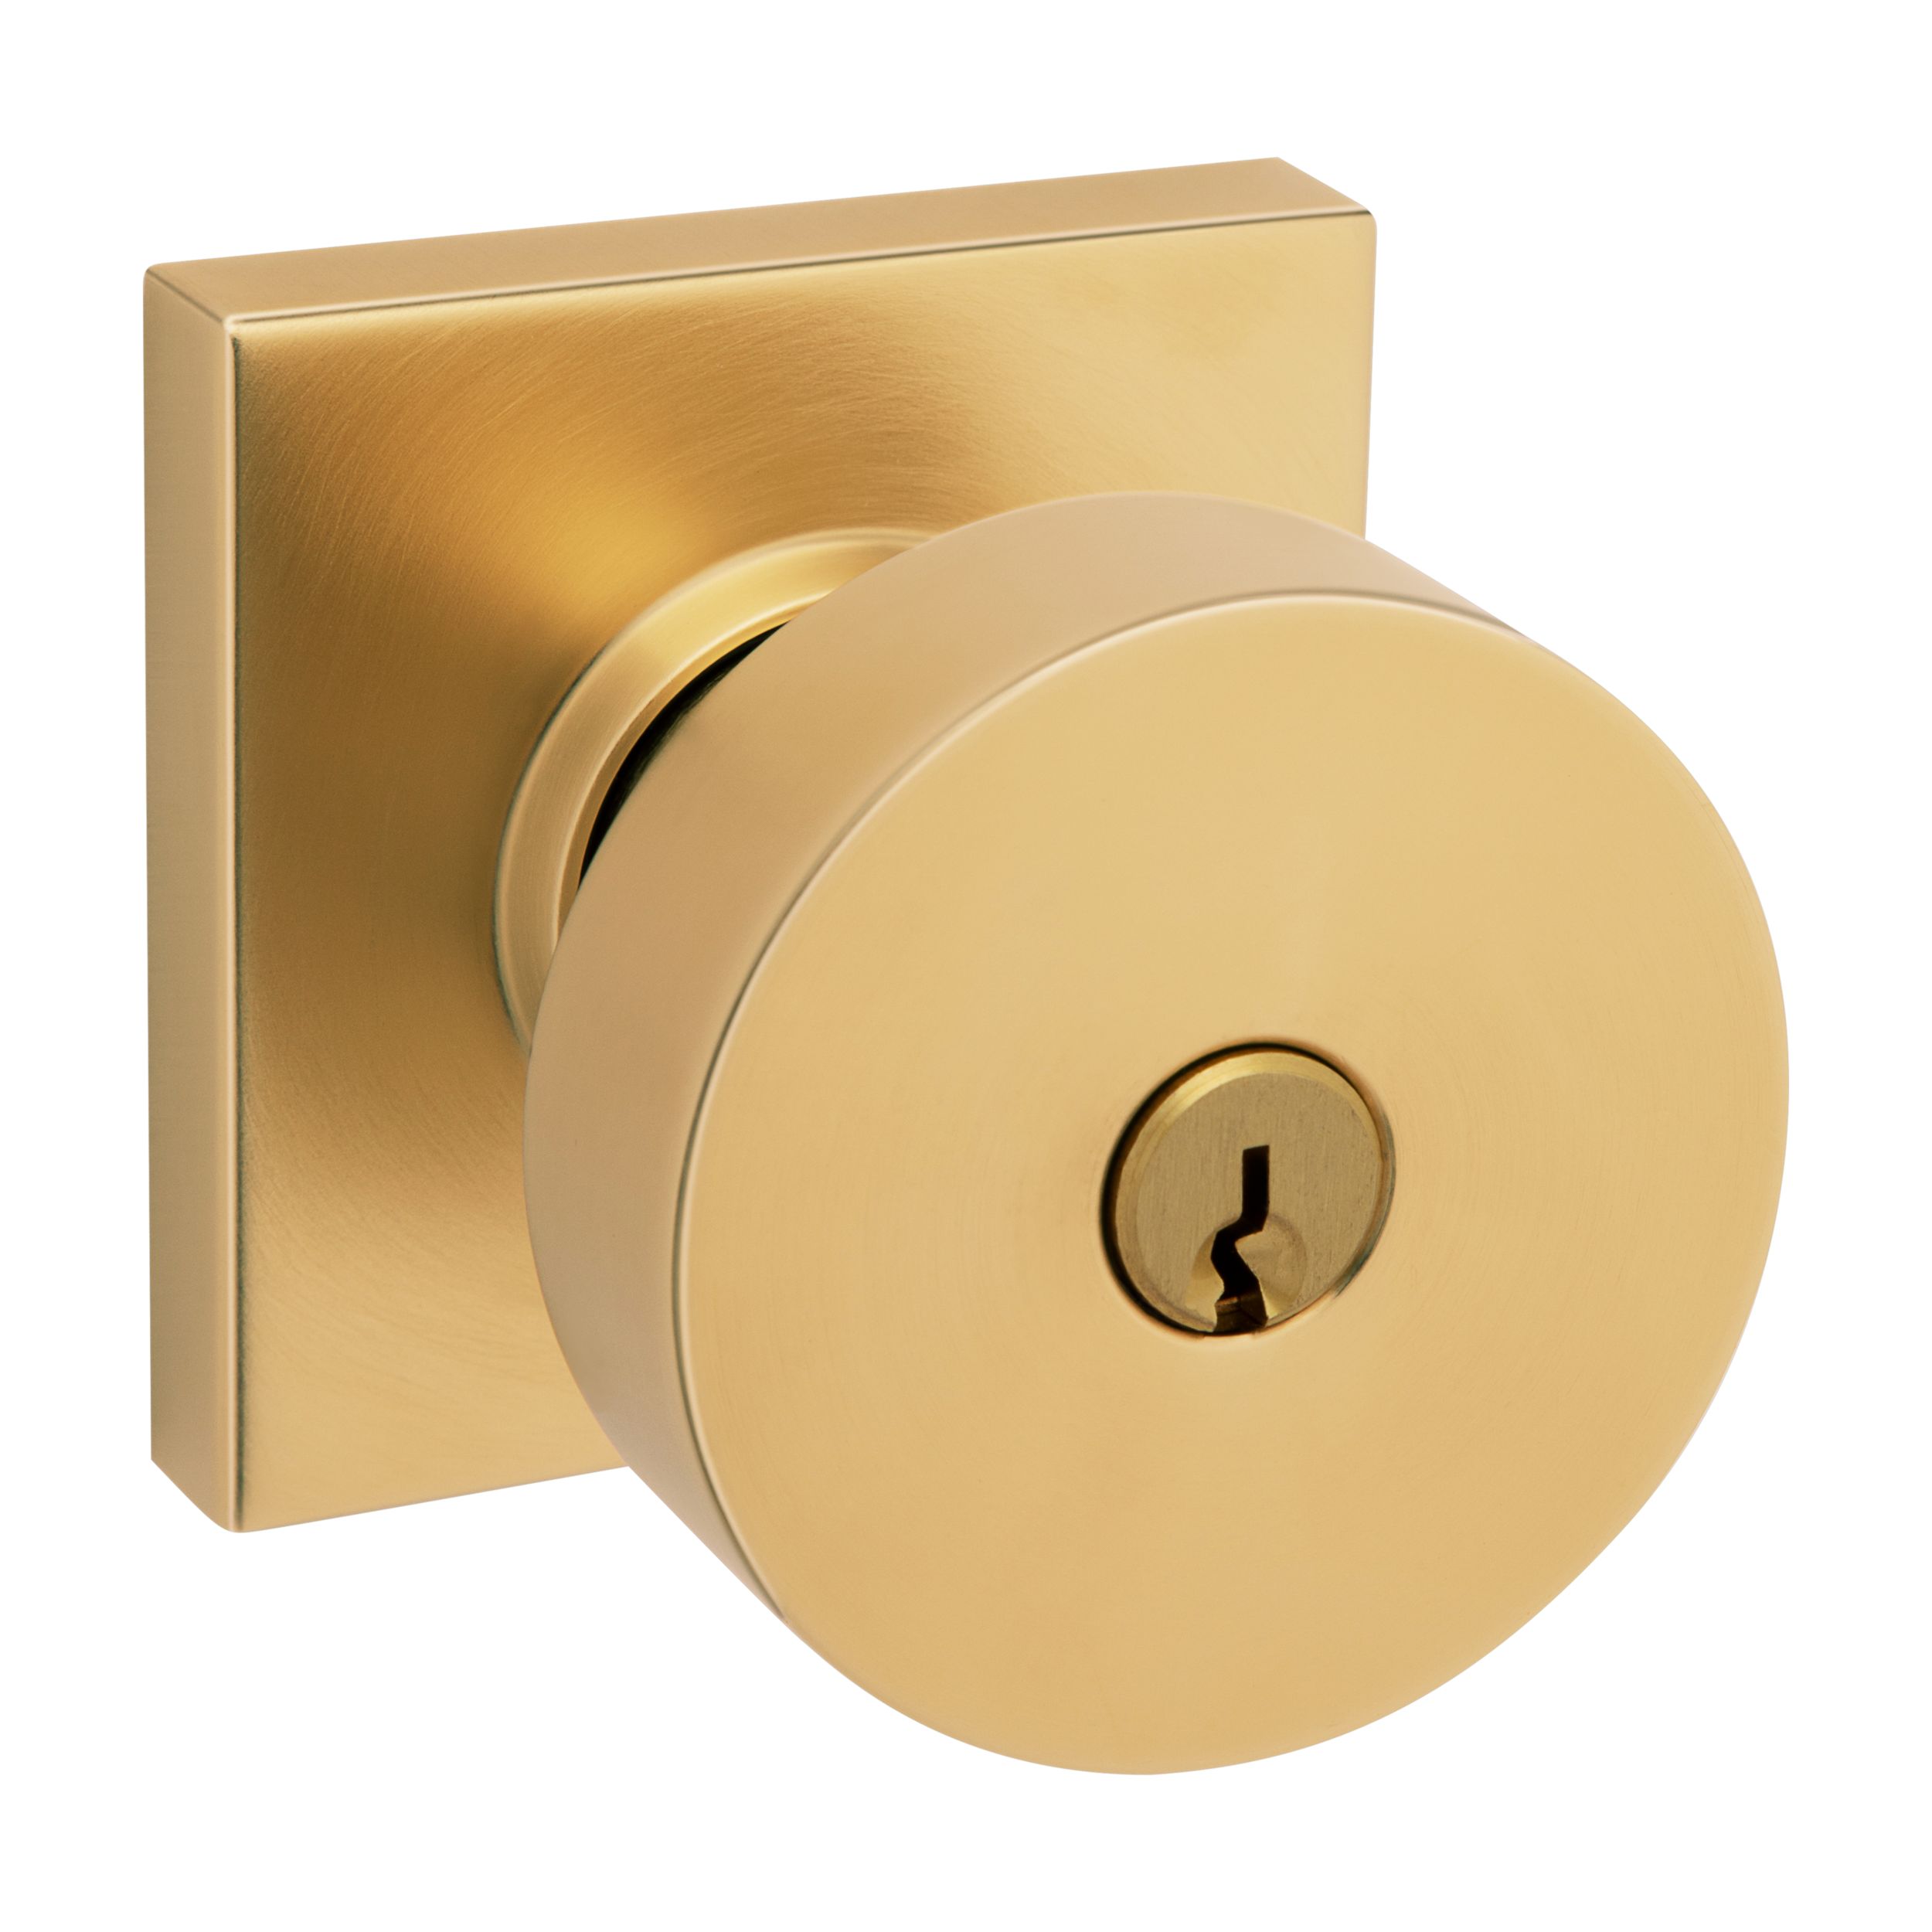 Baldwin SCTRDxENROUTRR044 Lifetime Satin Brass Round Single Cylinder Keyed  Entry Door Knob Set and Deadbolt Combo from the Reserve Collection 